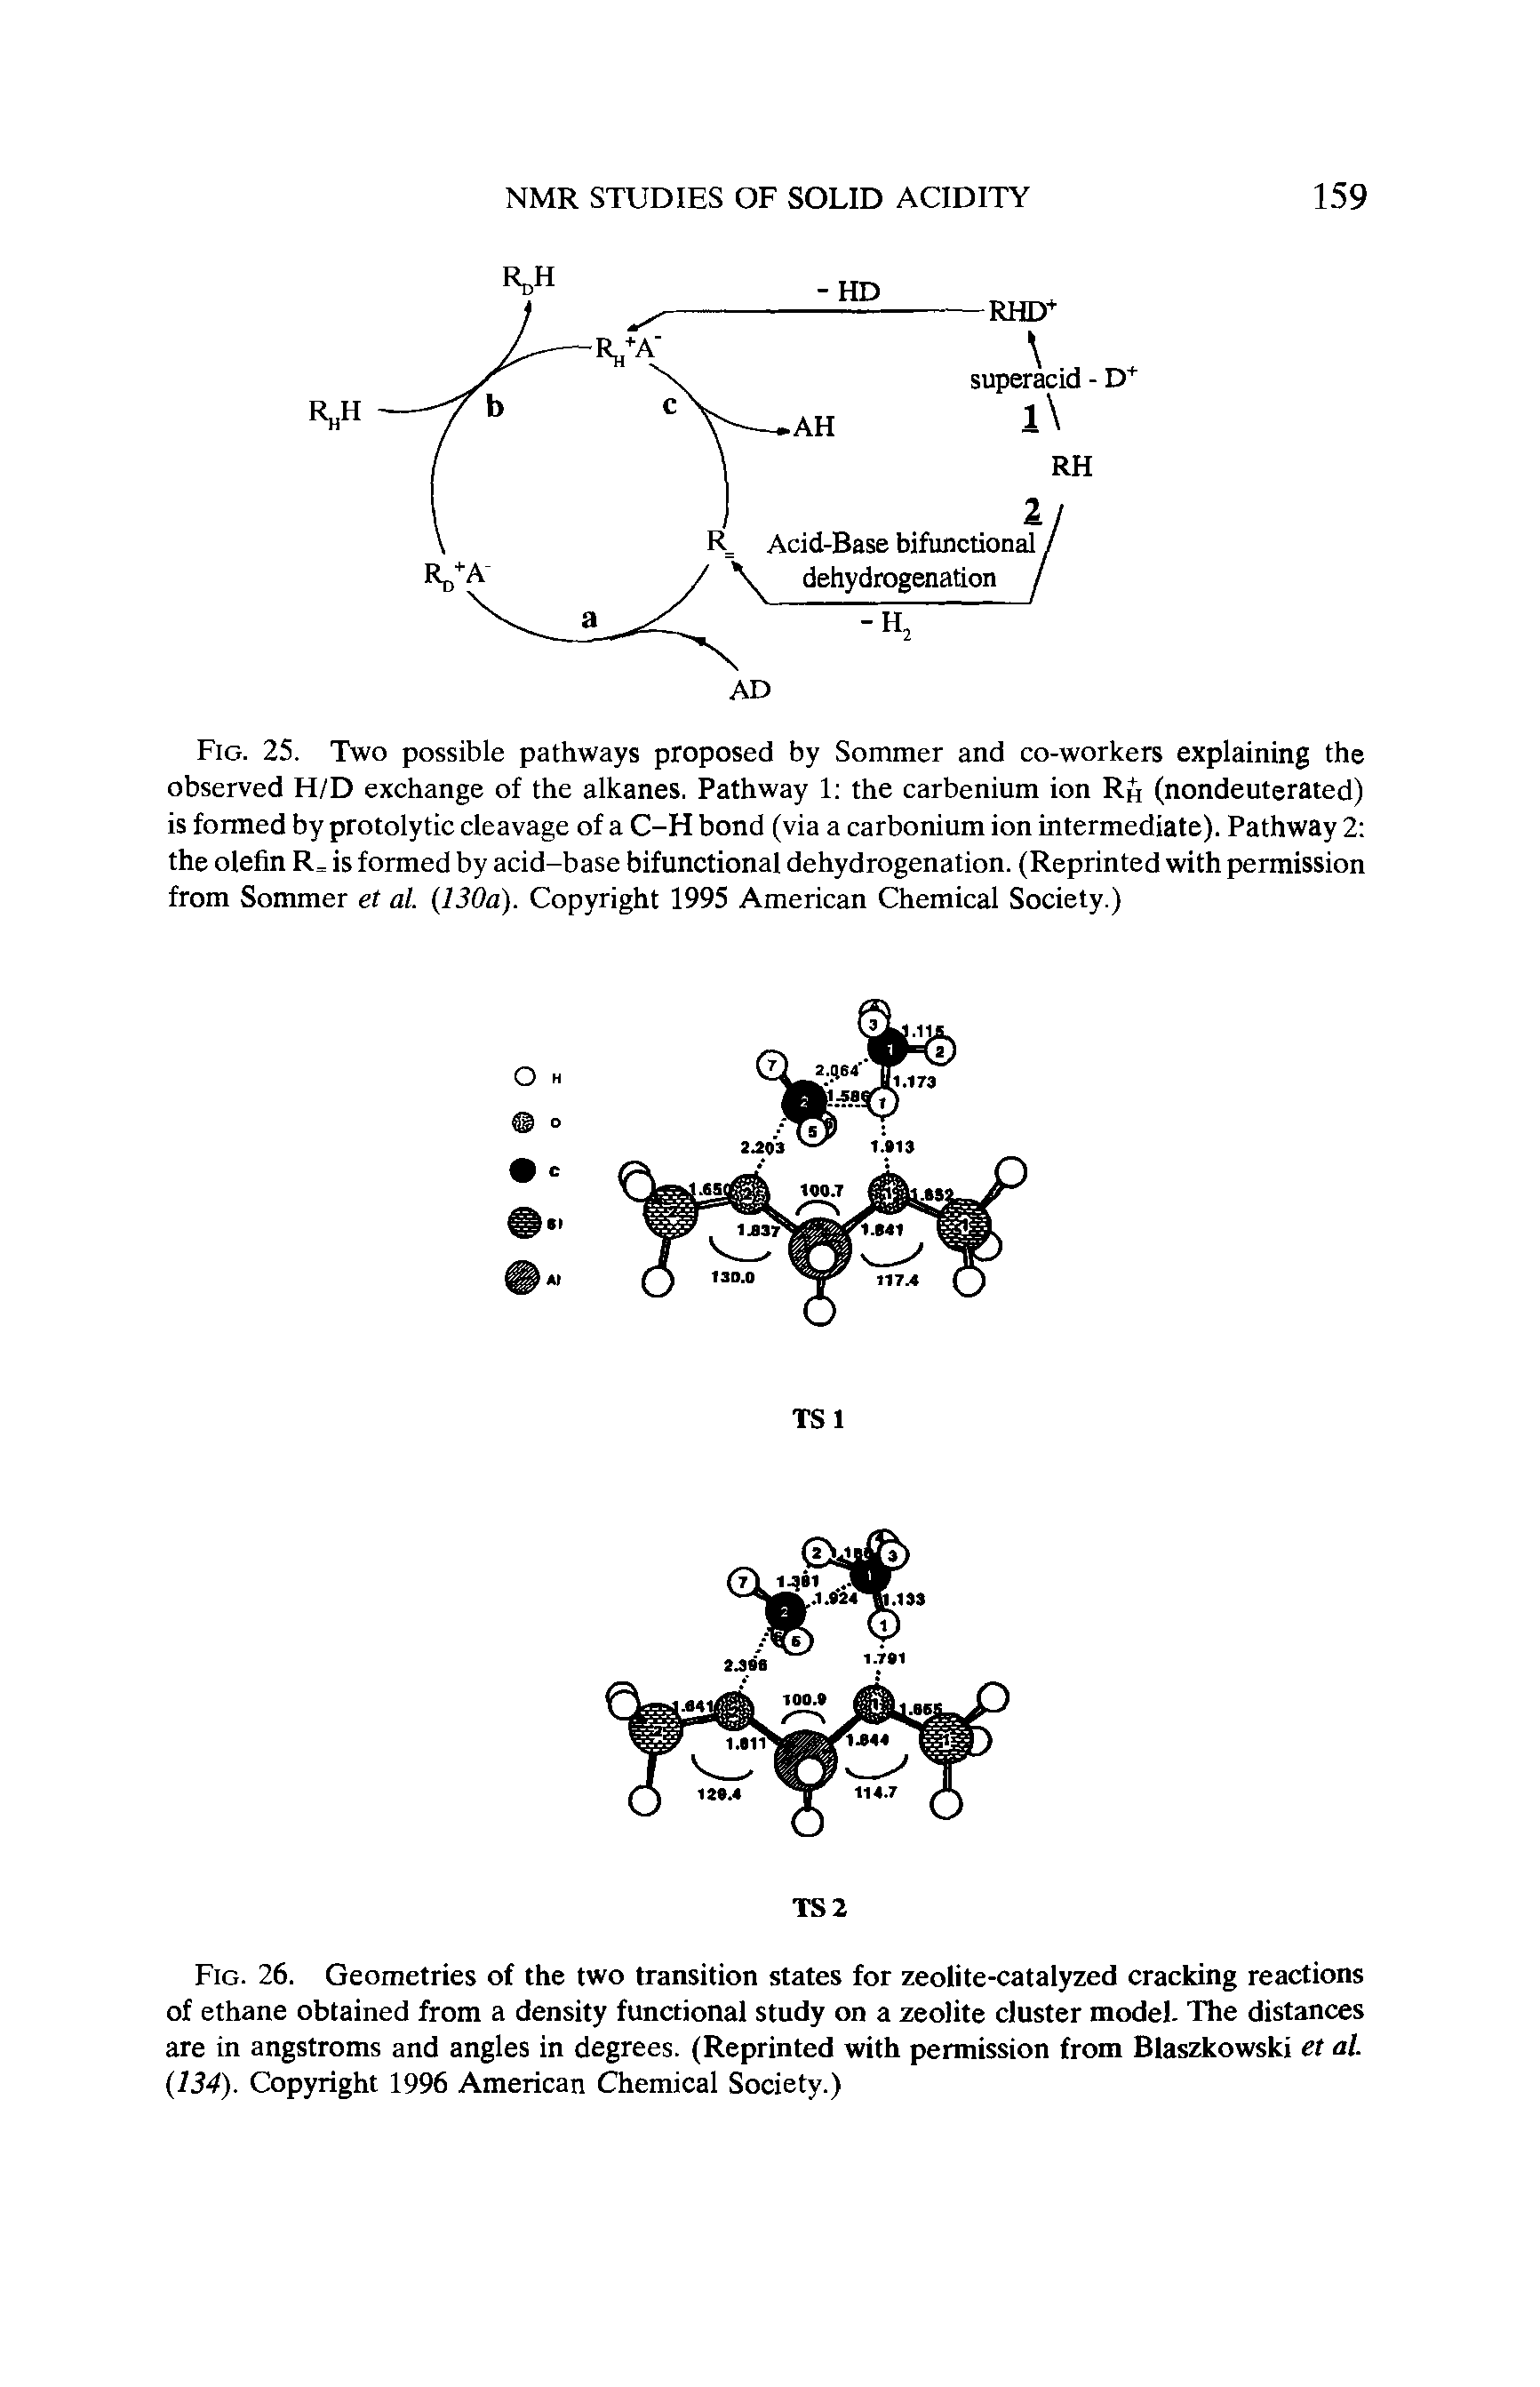 Fig. 26. Geometries of the two transition states for zeolite-catalyzed cracking reactions of ethane obtained from a density functional study on a zeolite cluster model. The distances are in angstroms and angles in degrees. (Reprinted with permission from Blaszkowski et al. (134). Copyright 1996 American Chemical Society.)...